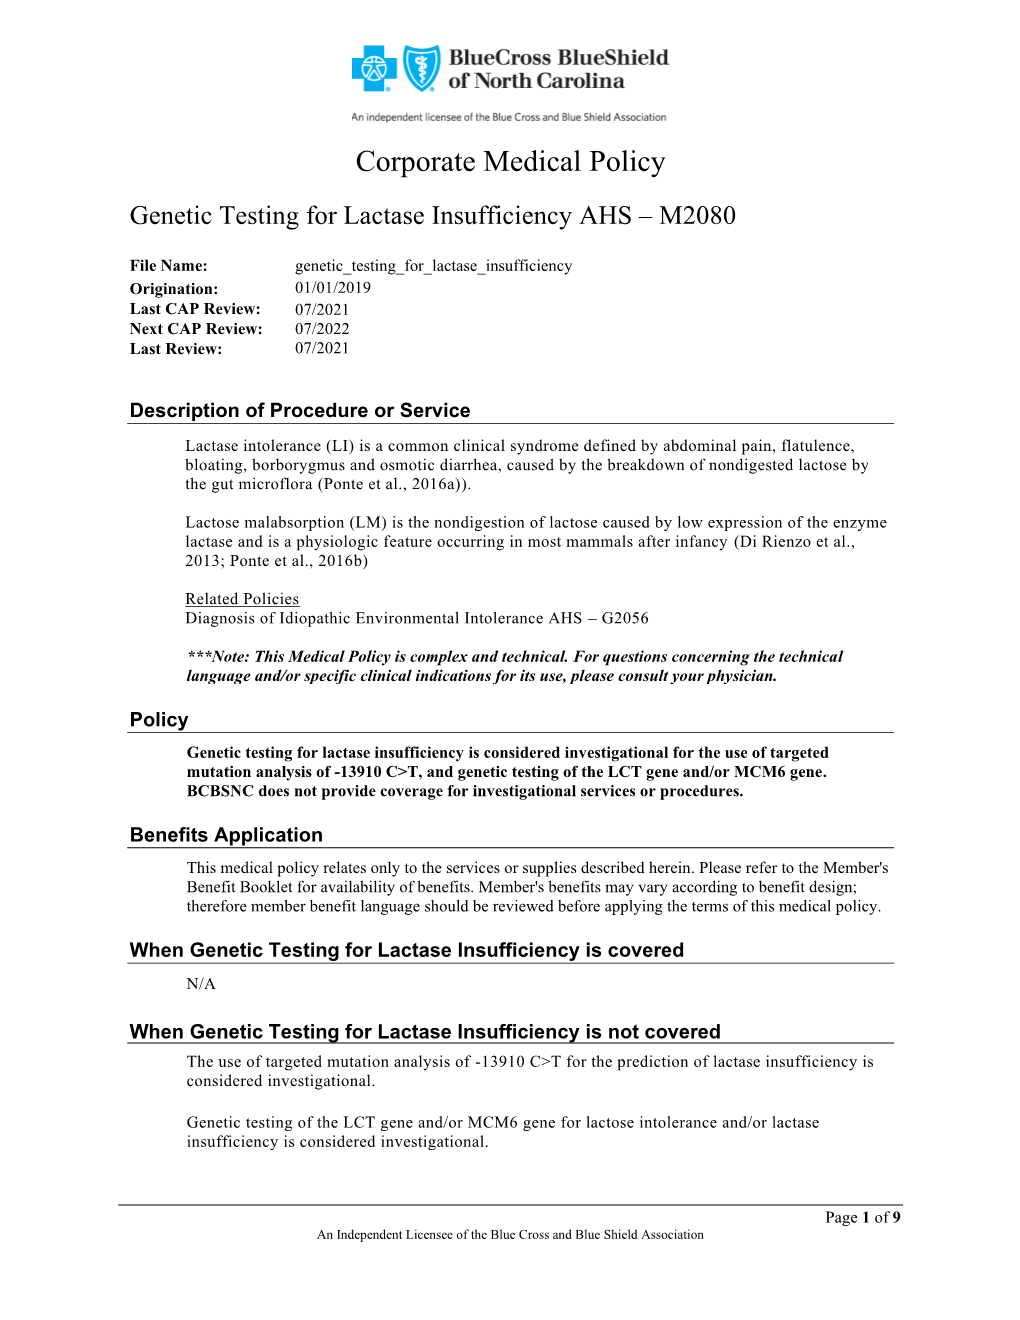 Genetic Testing for Lactase Insufficiency AHS – M2080